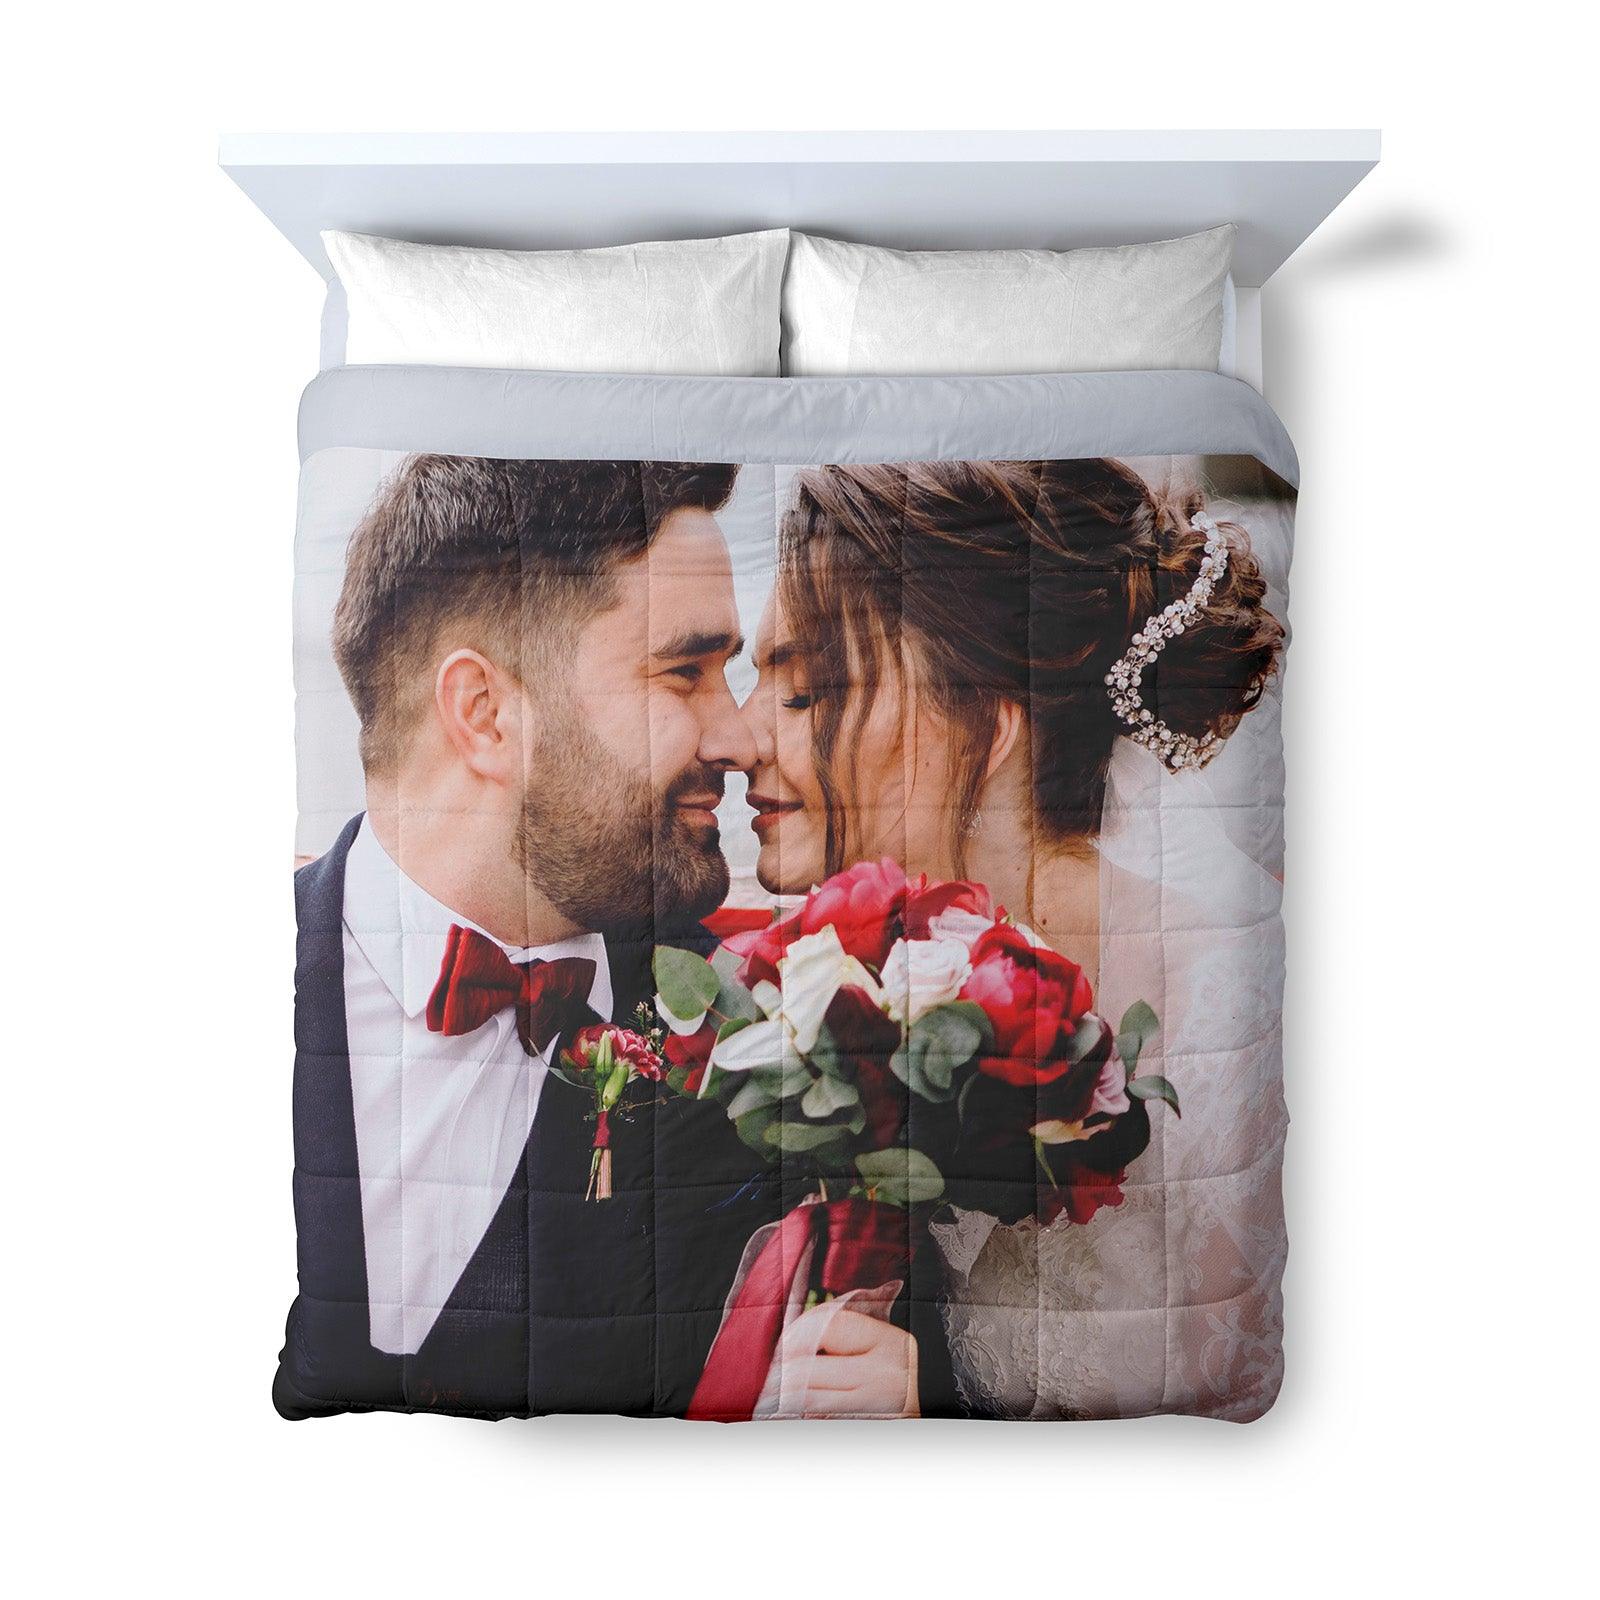 Custom Photo Duvet Covers Custom Photo Duvet Covers - undefined - Qstomize.com